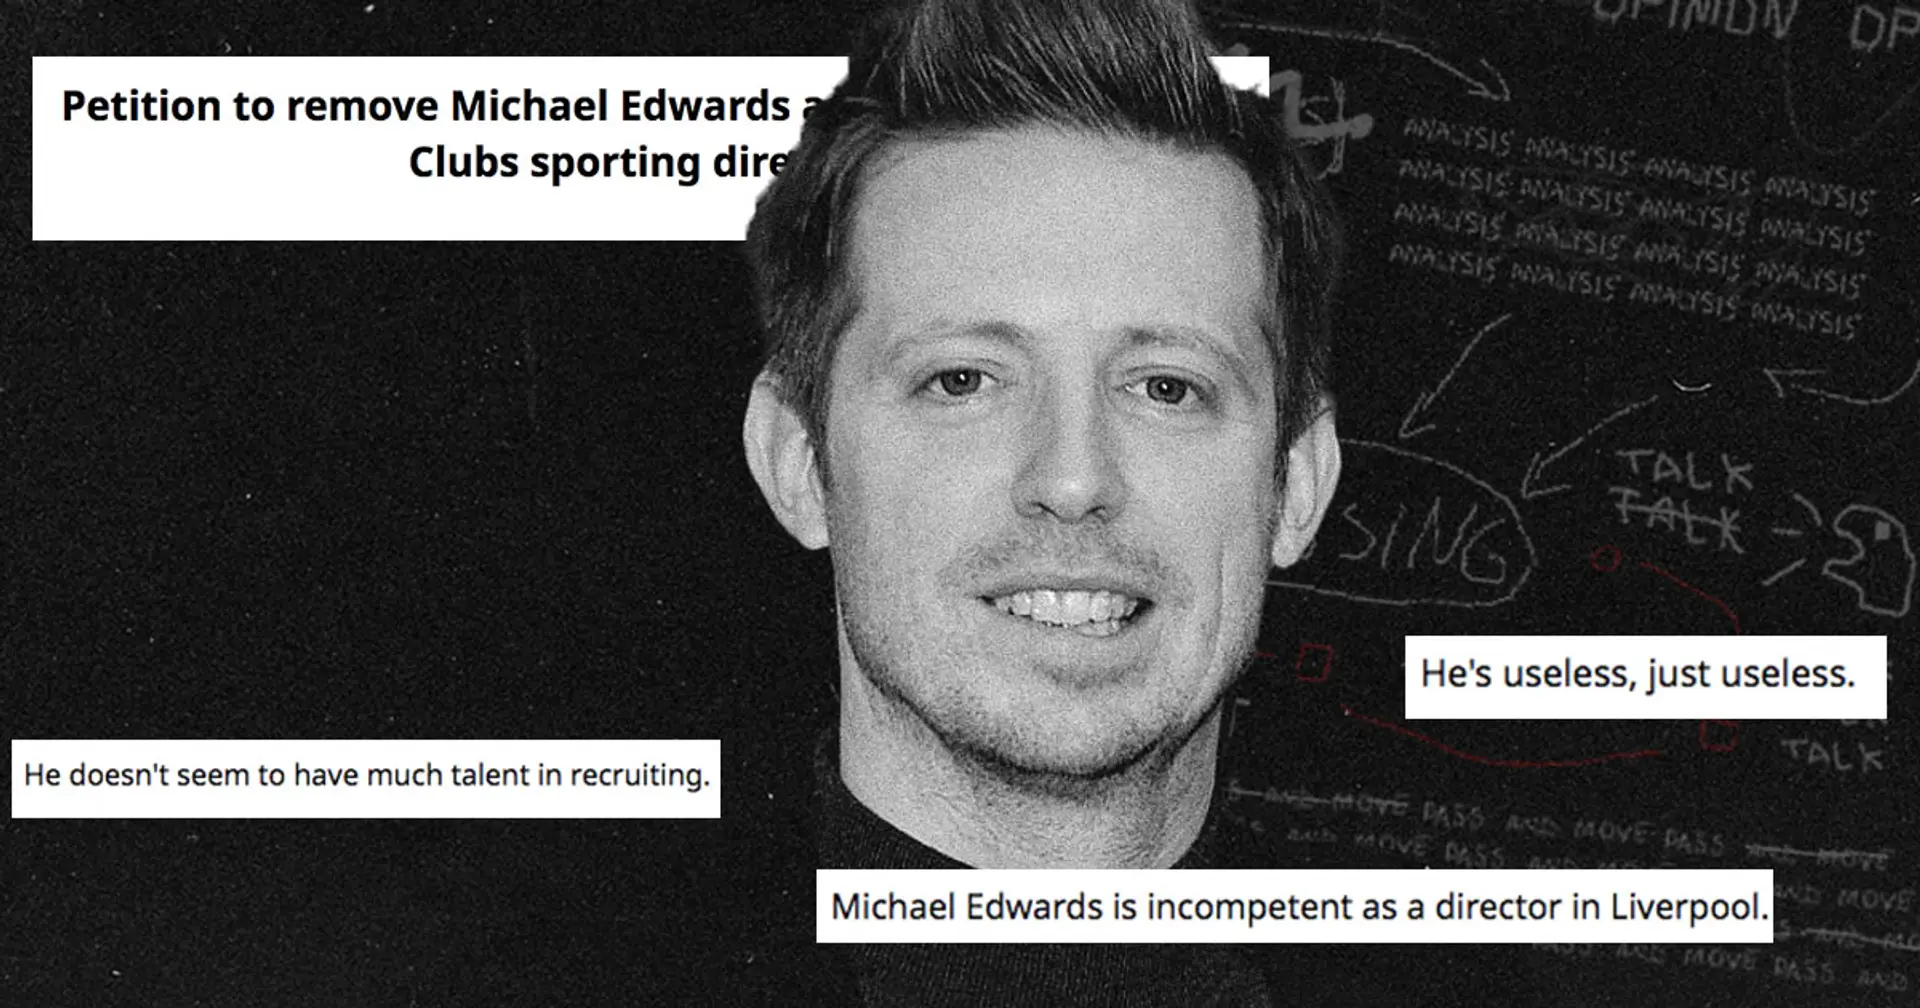 Liverpool fans once petitioned to remove 'blind and incompetent' Michael Edwards as sporting director